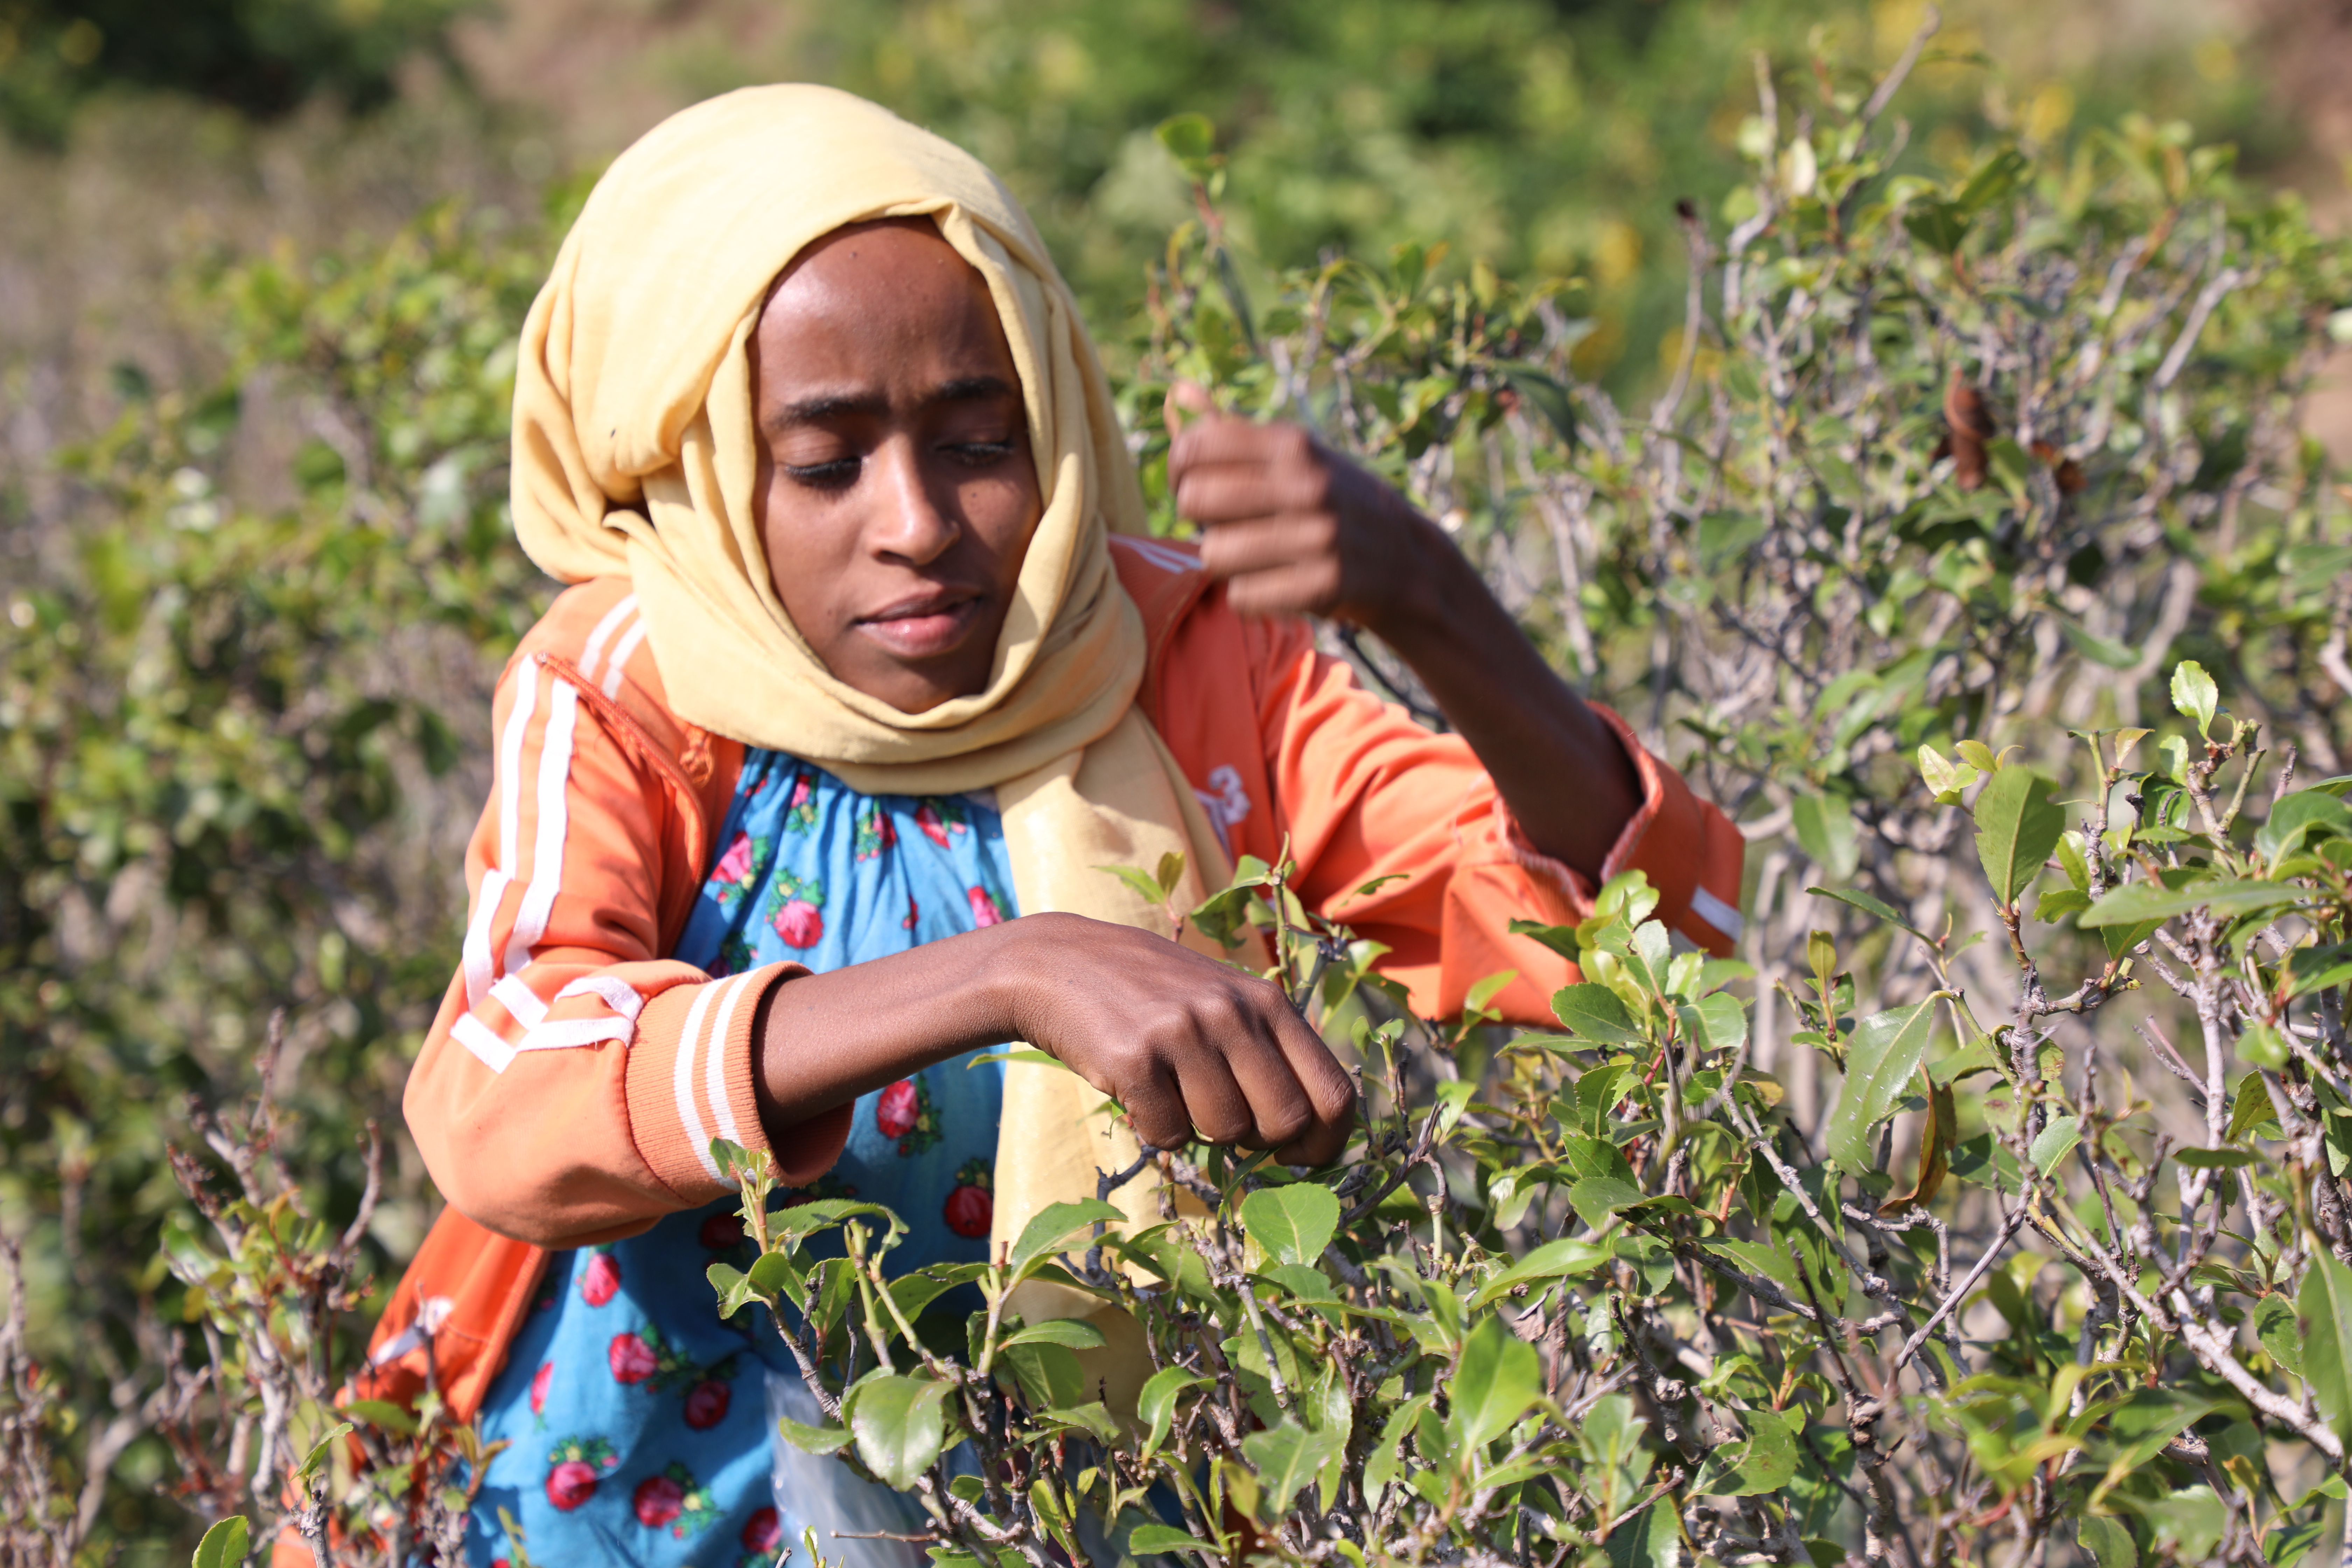 Merem, a young girl in Ethiopia, spends her days collecting Khat leaves